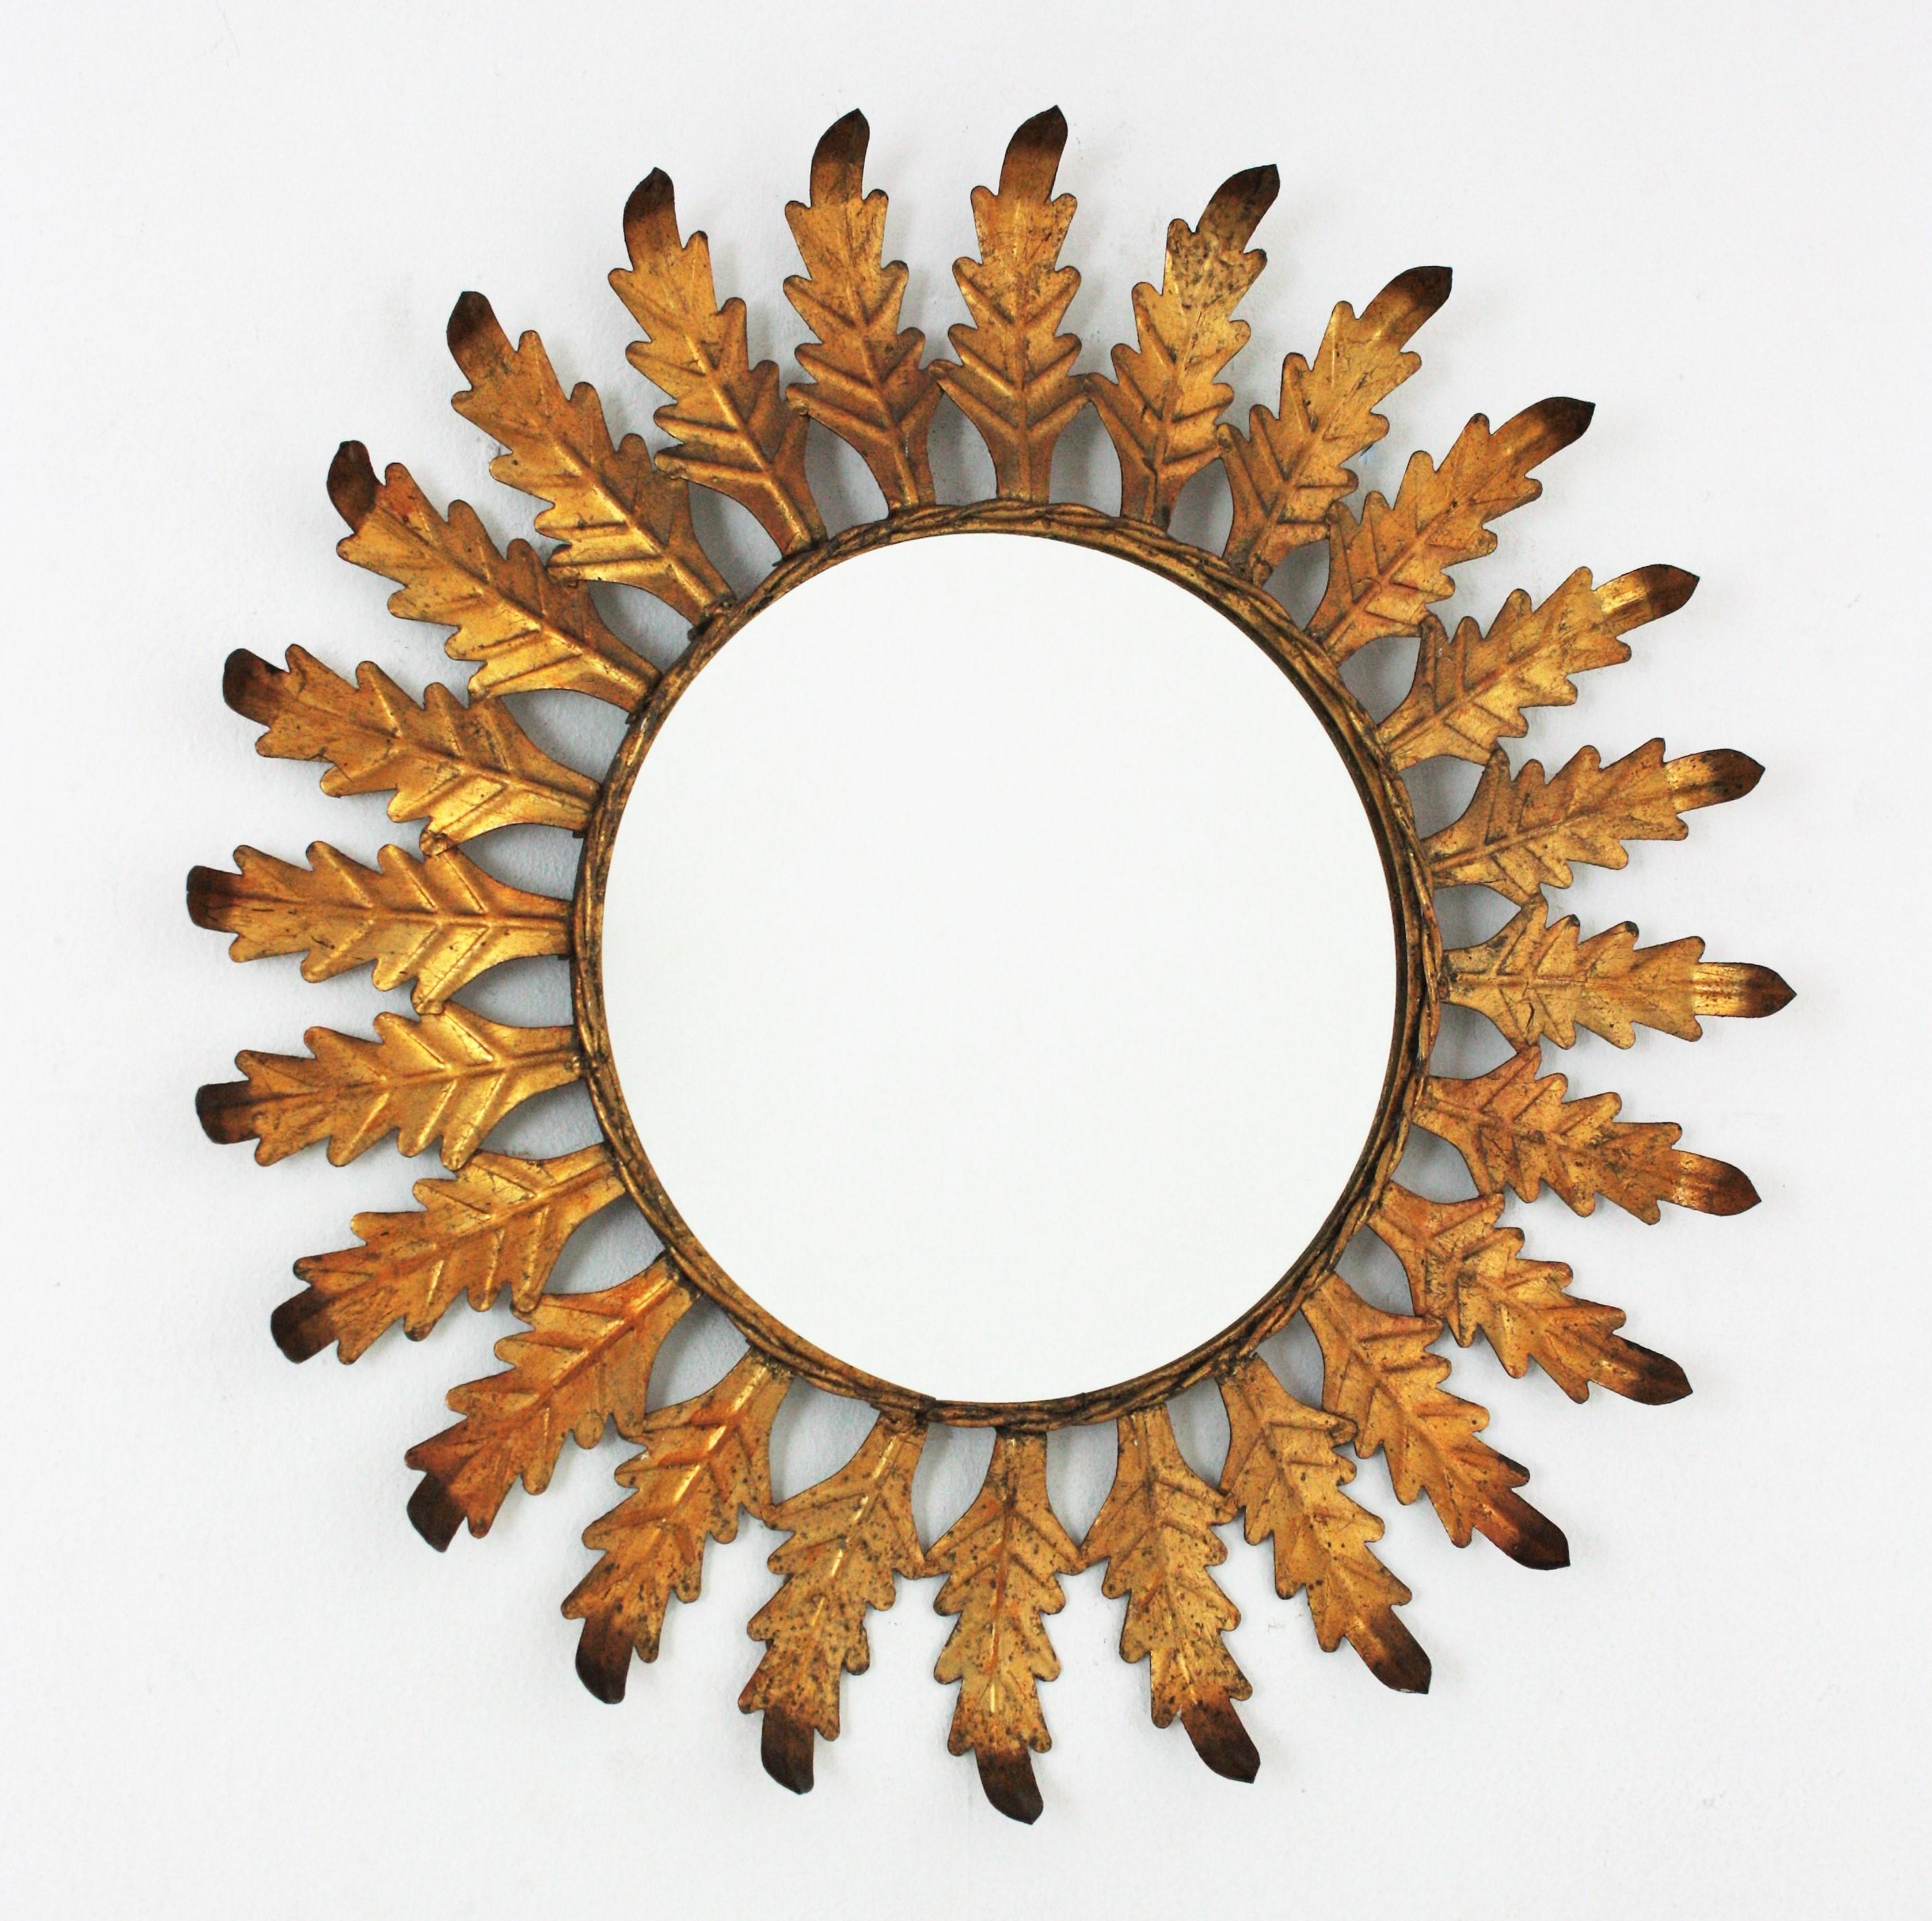 Sunburst Mirror with leaves frame, gilt iron, Spain, 1960s.
This eye-catching wall mirror has a leafed sunburst frame finished with gold leaf gilding and darker accents on the leaf endings. 
Nice aged patina and original gilding. 
Overall